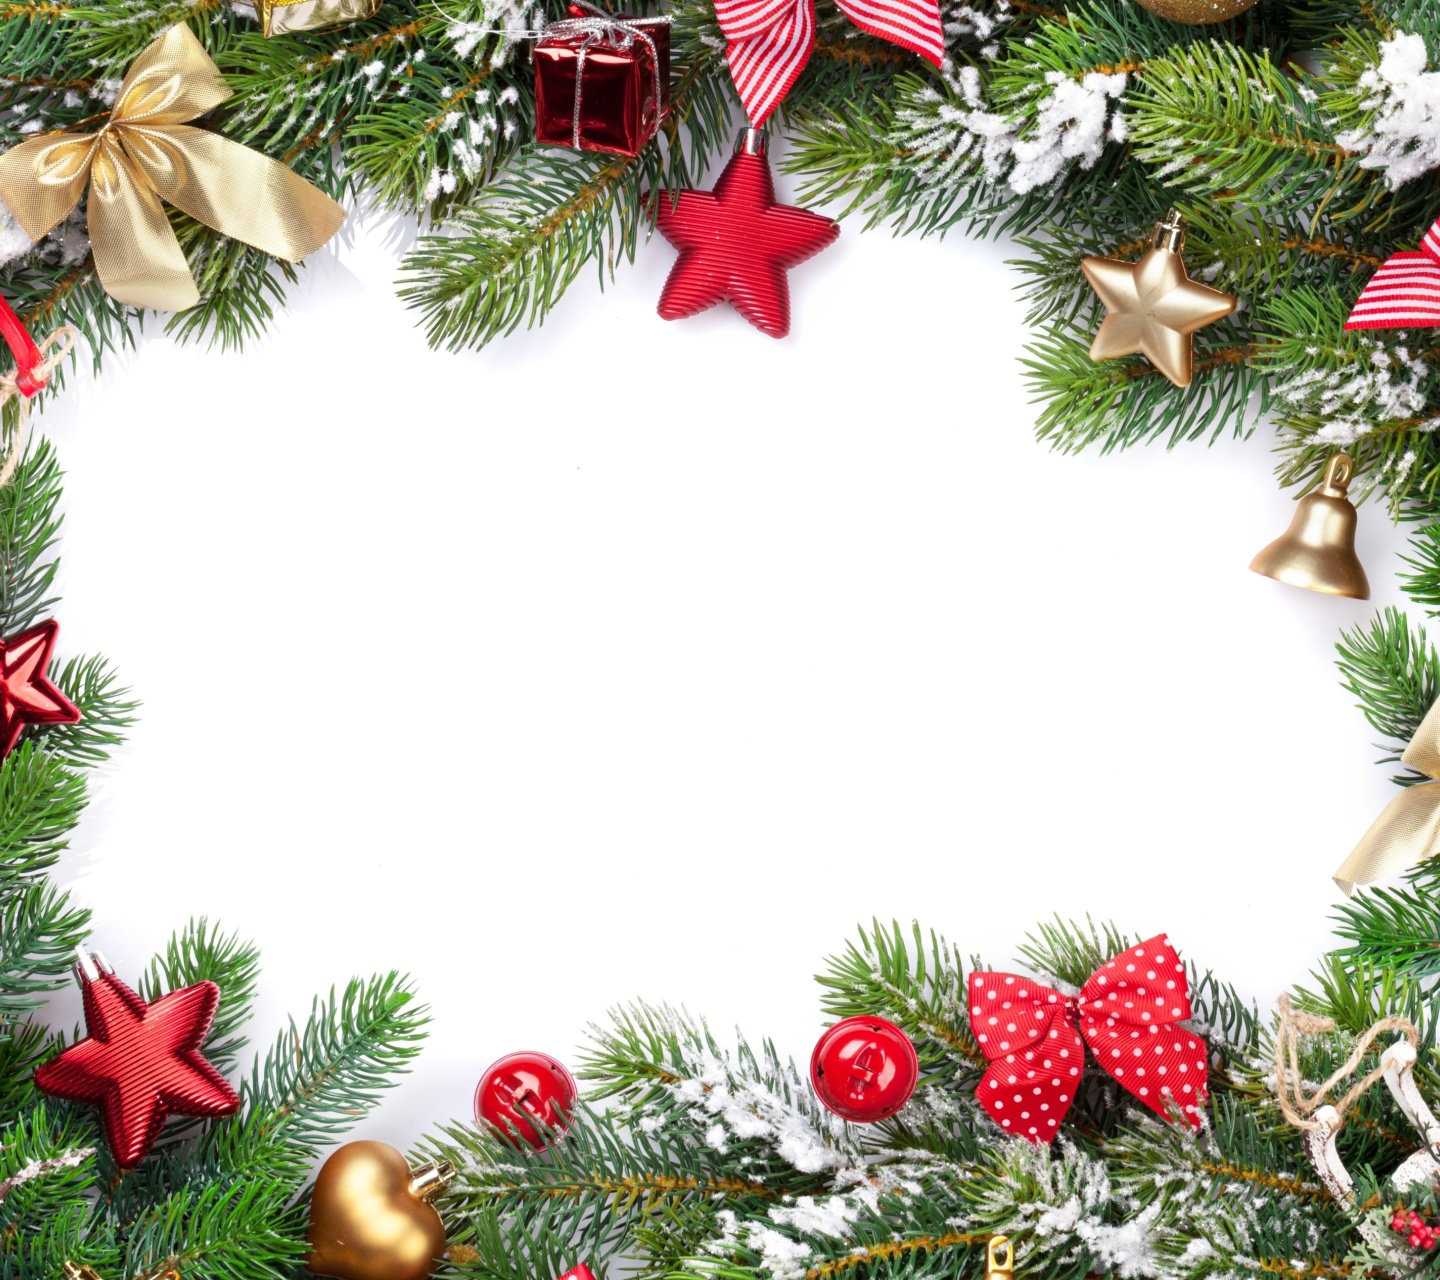 Festival decorate a christmas tree wallpaper 1440x1280